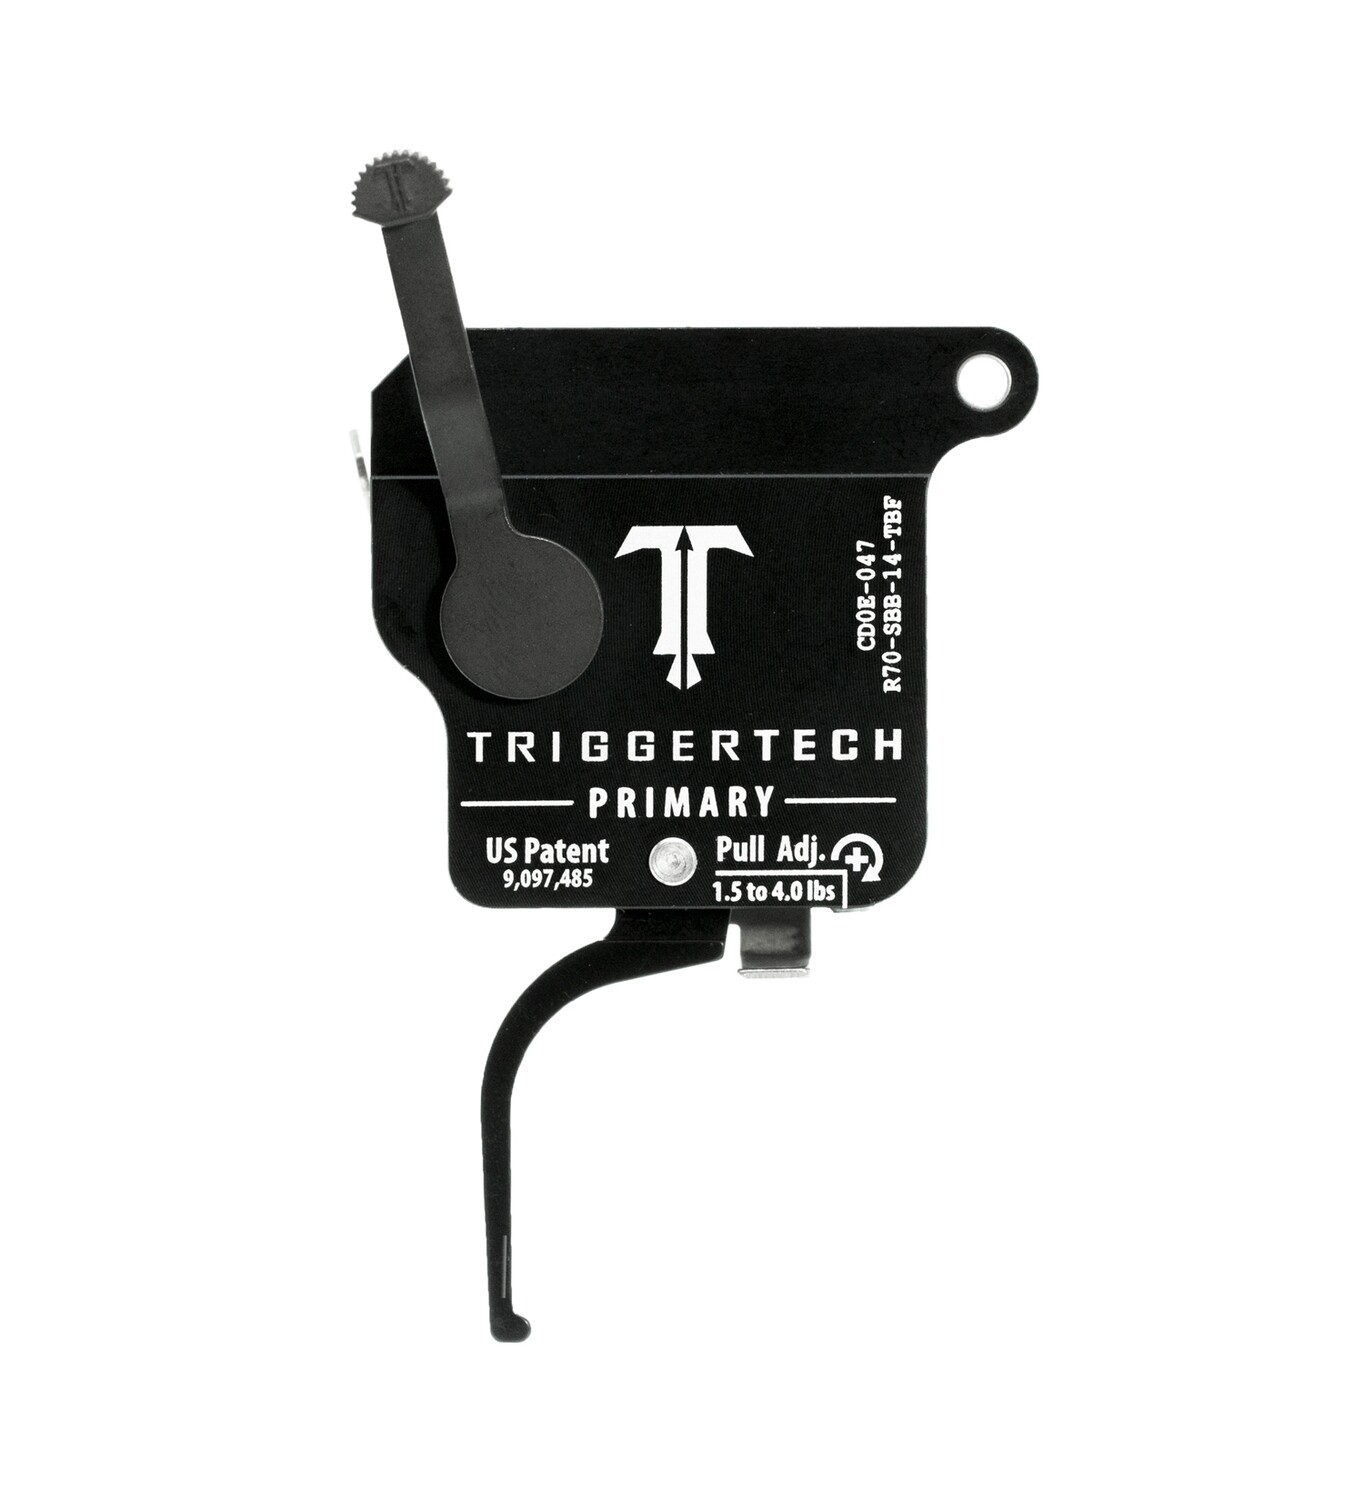 TriggerTech Primary Flat PVD 1.5-4lb Trigger for Remington 700